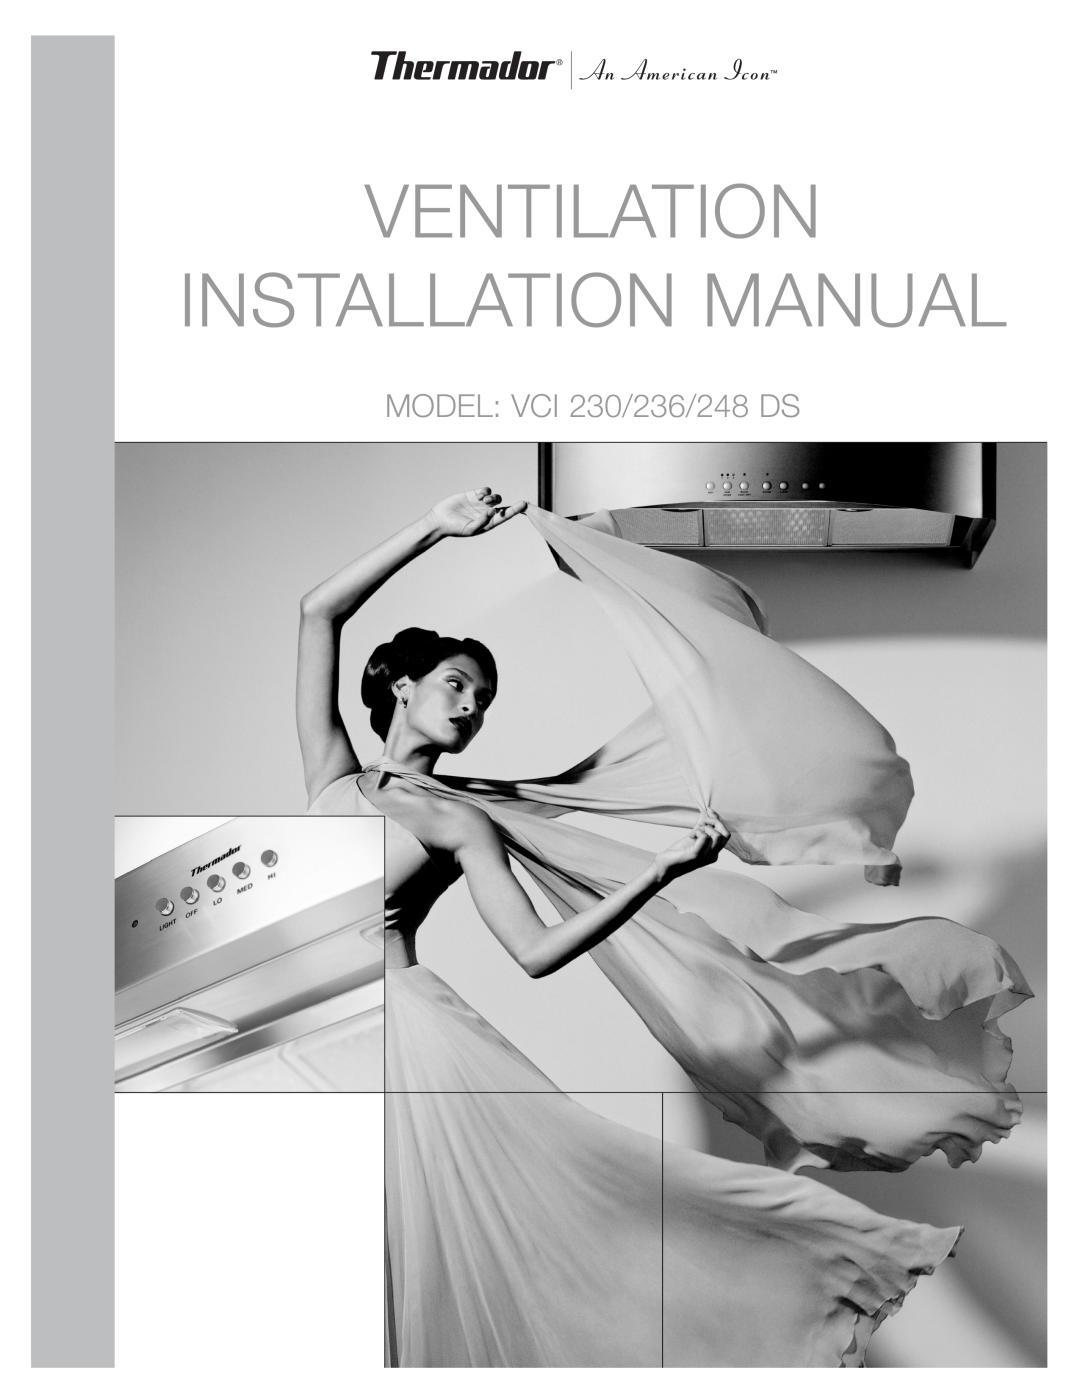 Thermador VCI 230/236/248 DS installation manual Ventilventilationation, Instalinstallationation Mamanualal 